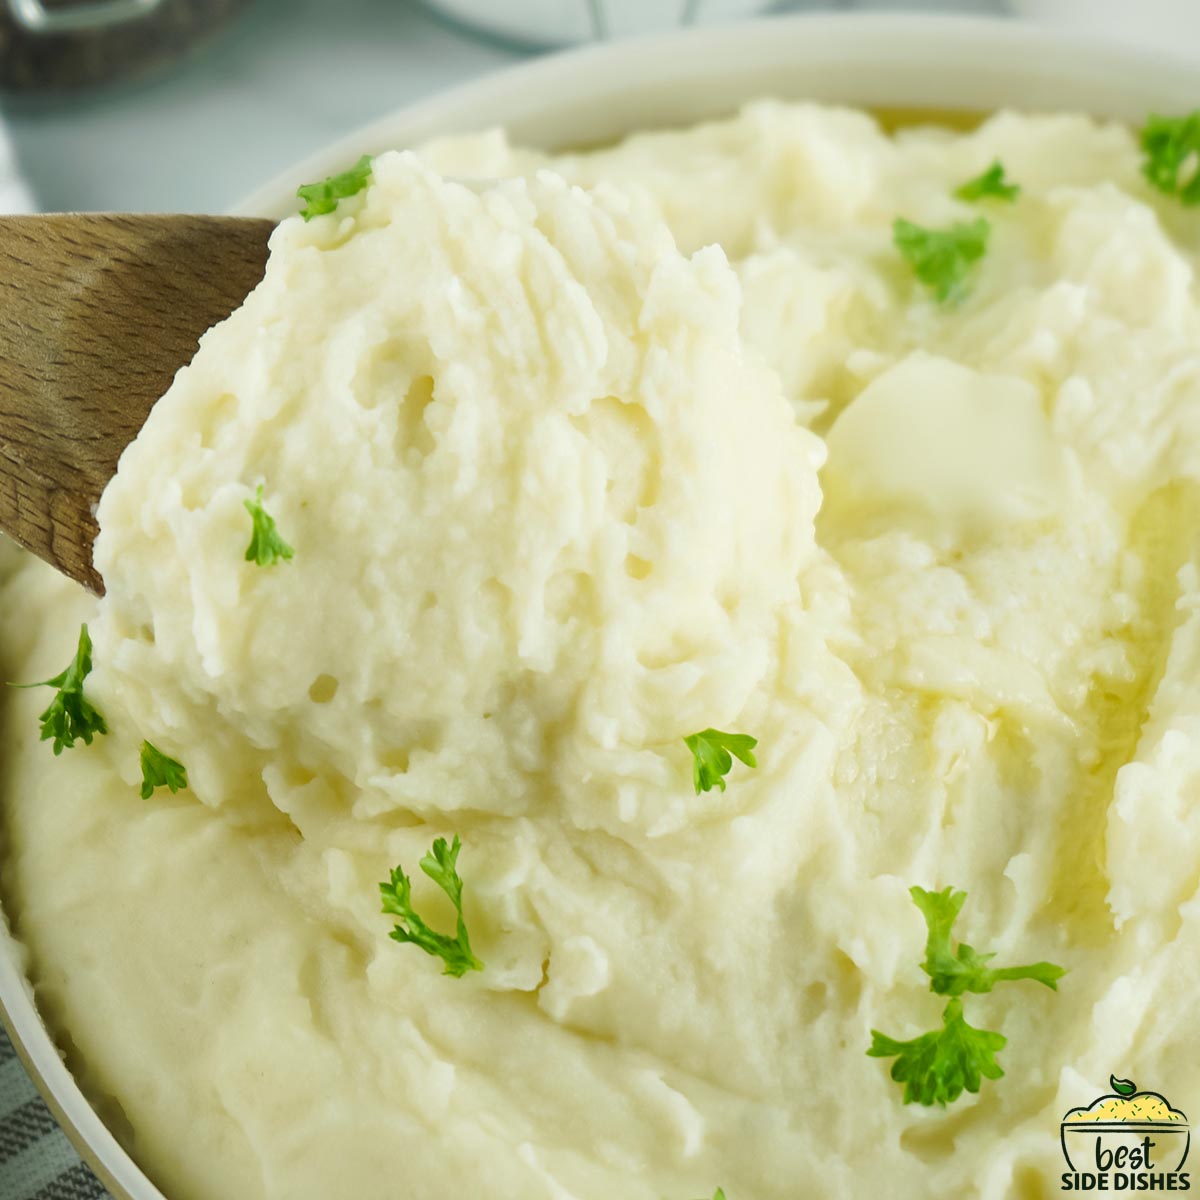 a spoon full of completed mashed potatoes over a serving bowl of mashed potatoes